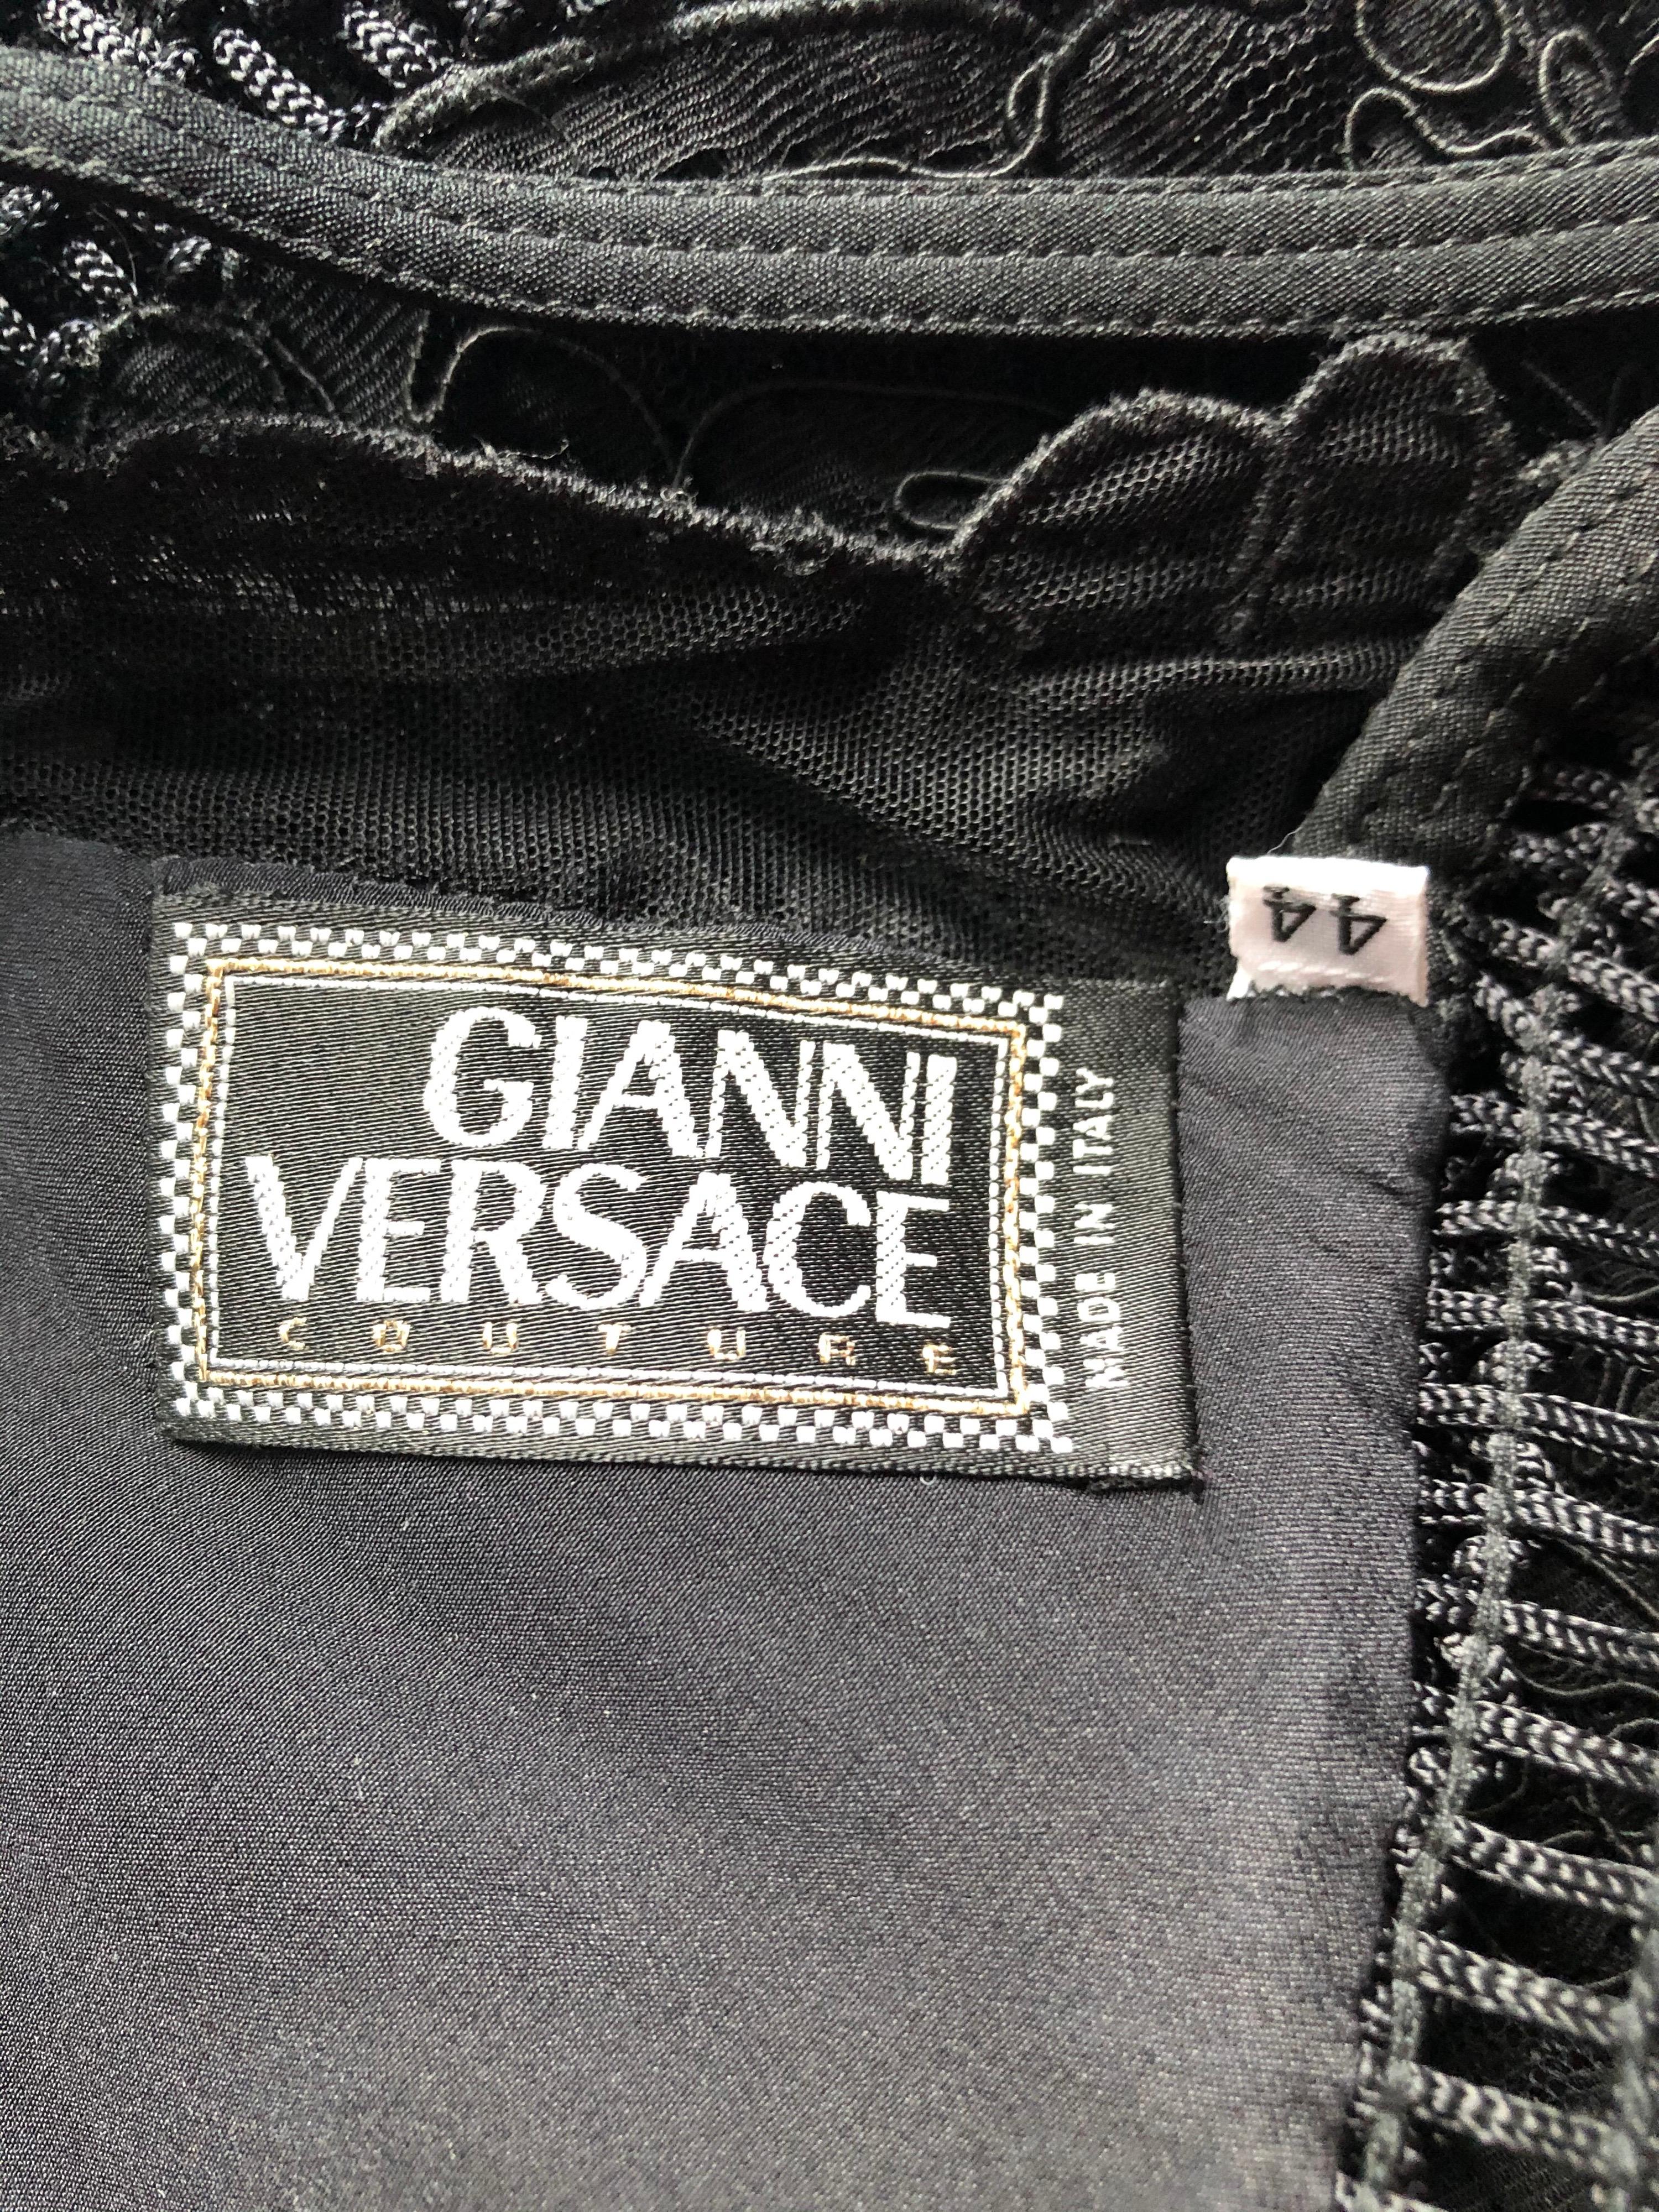 Gianni Versace F/W 1993 Runway Couture Sheer Knit Mesh Lace Evening Dress Gown For Sale 2